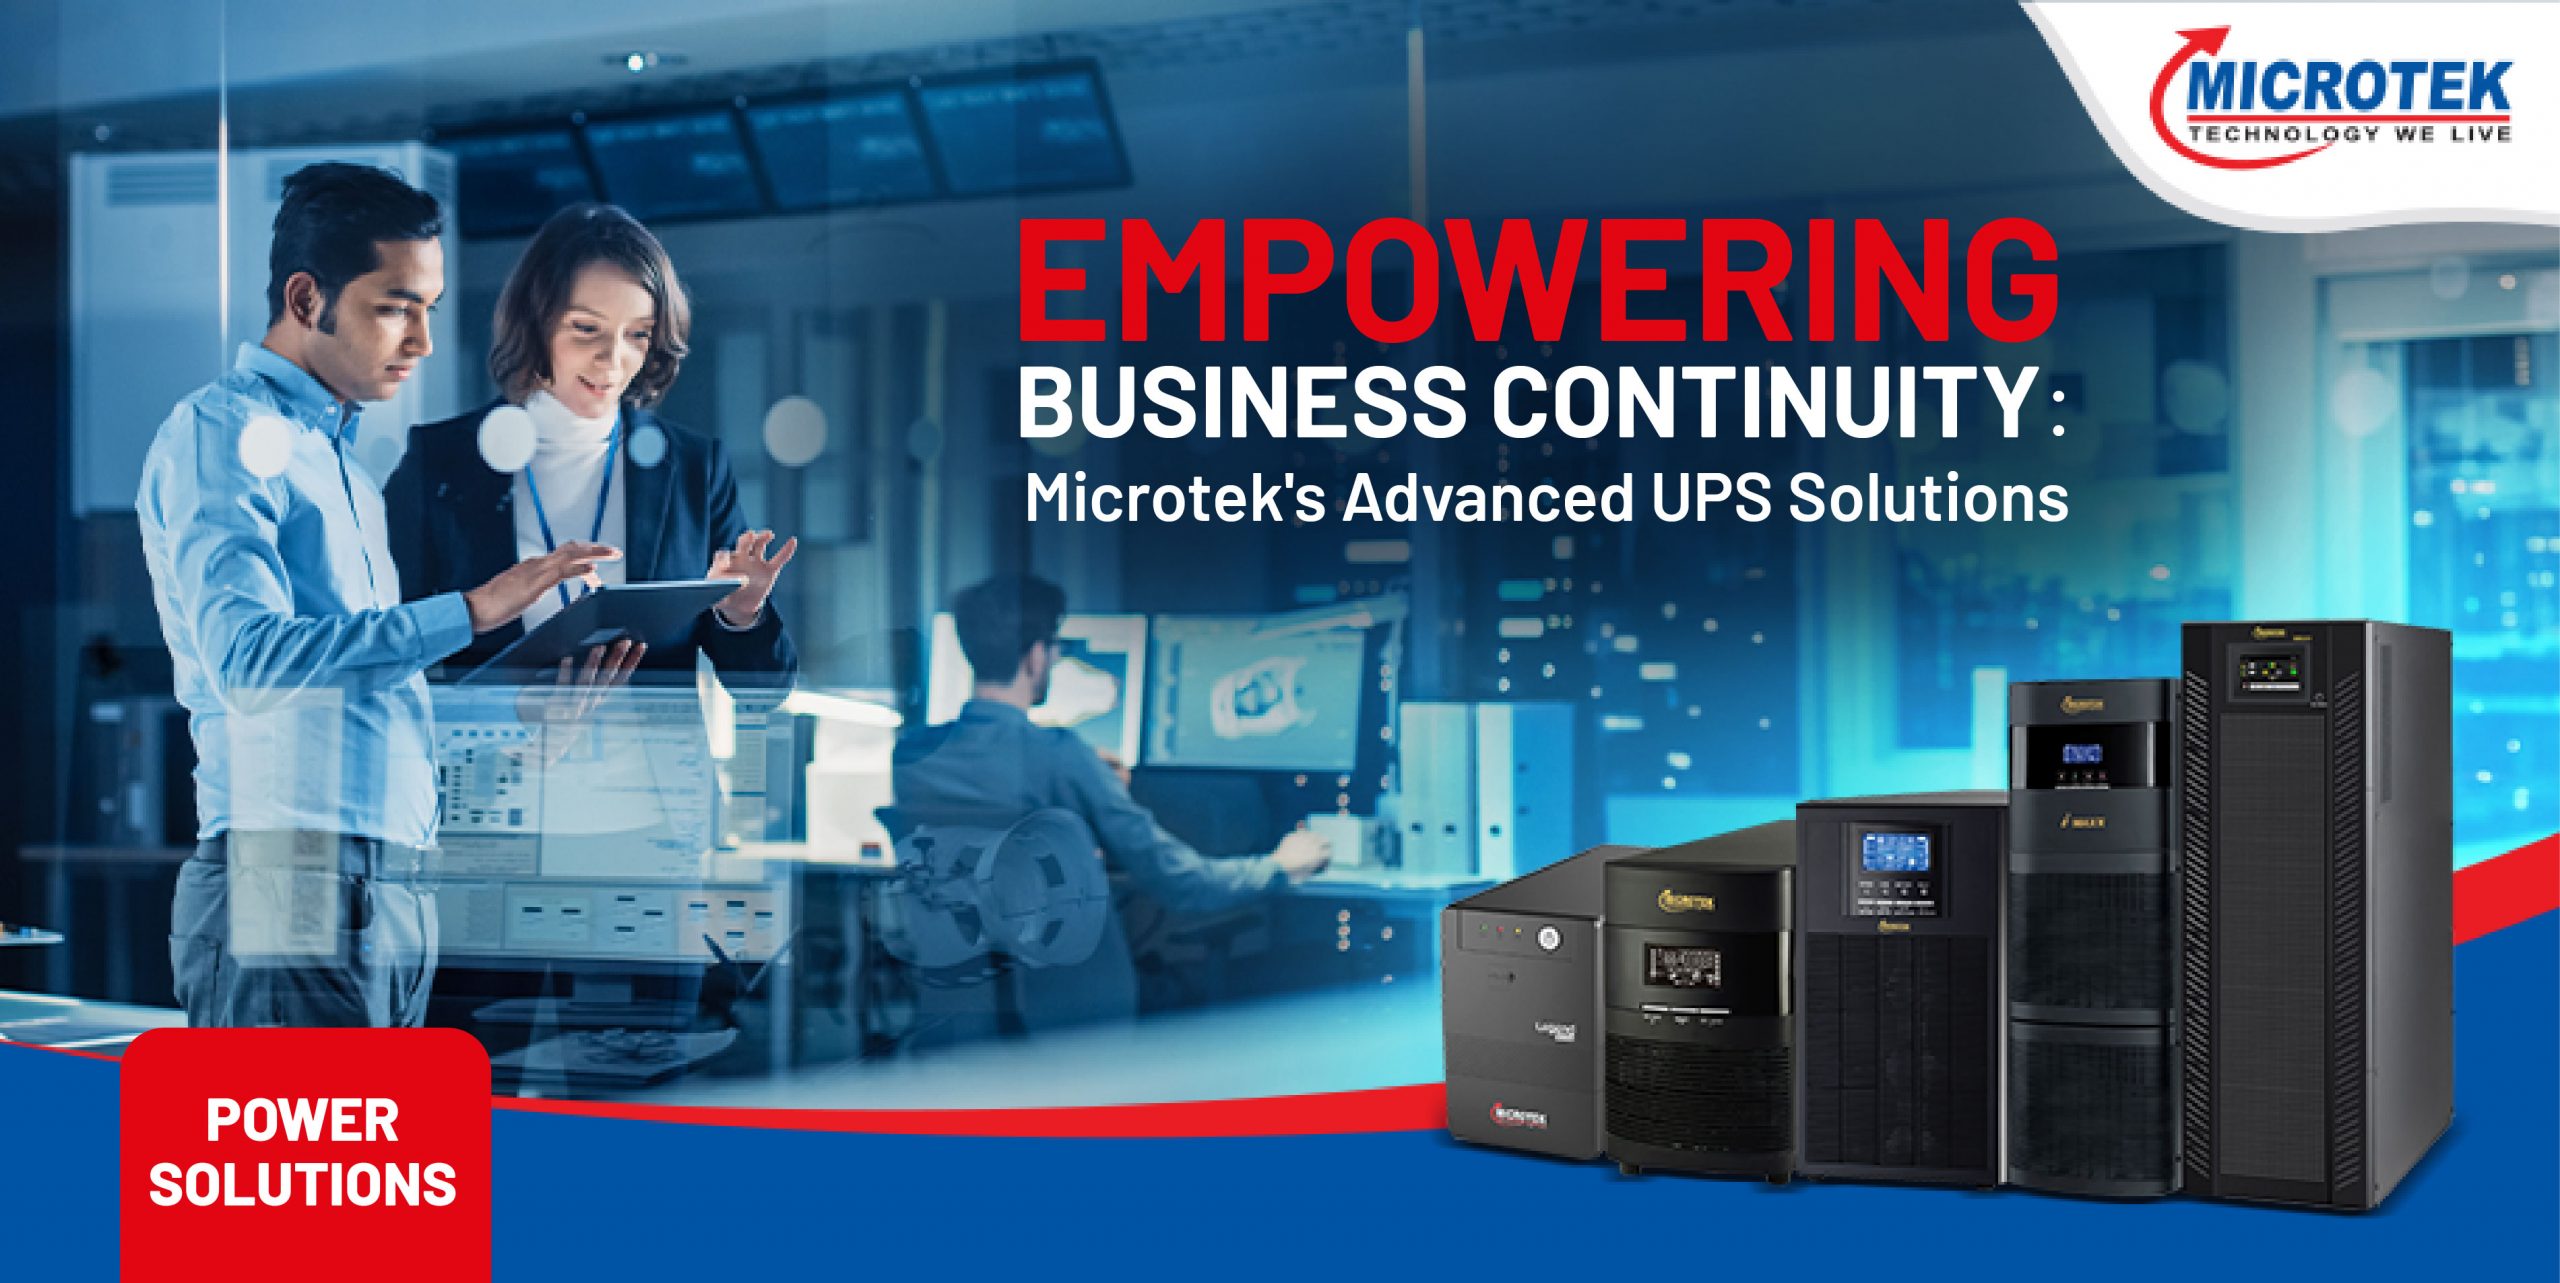 Empowering Business Continuity: Microtek’s Advanced UPS Solutions